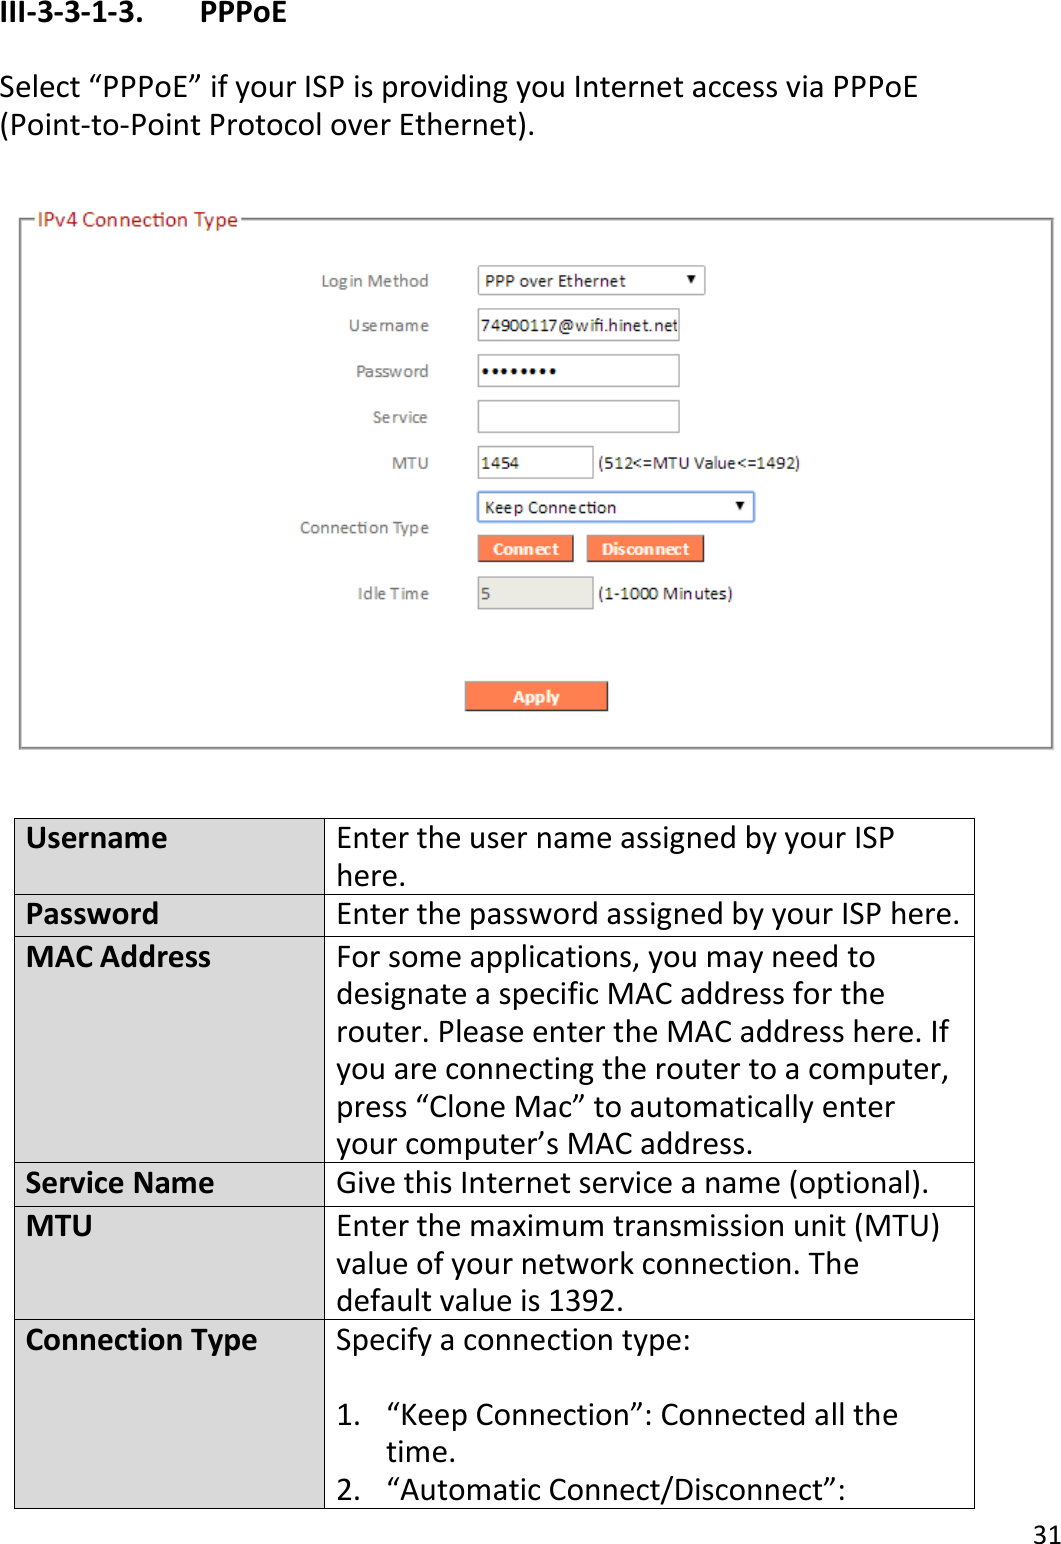 31  III-3-3-1-3.    PPPoE  Select “PPPoE” if your ISP is providing you Internet access via PPPoE (Point-to-Point Protocol over Ethernet).    Username Enter the user name assigned by your ISP here. Password Enter the password assigned by your ISP here. MAC Address For some applications, you may need to designate a specific MAC address for the router. Please enter the MAC address here. If you are connecting the router to a computer, press “Clone Mac” to automatically enter your computer’s MAC address. Service Name Give this Internet service a name (optional). MTU Enter the maximum transmission unit (MTU) value of your network connection. The default value is 1392. Connection Type Specify a connection type:  1. “Keep Connection”: Connected all the time. 2. “Automatic Connect/Disconnect”: 